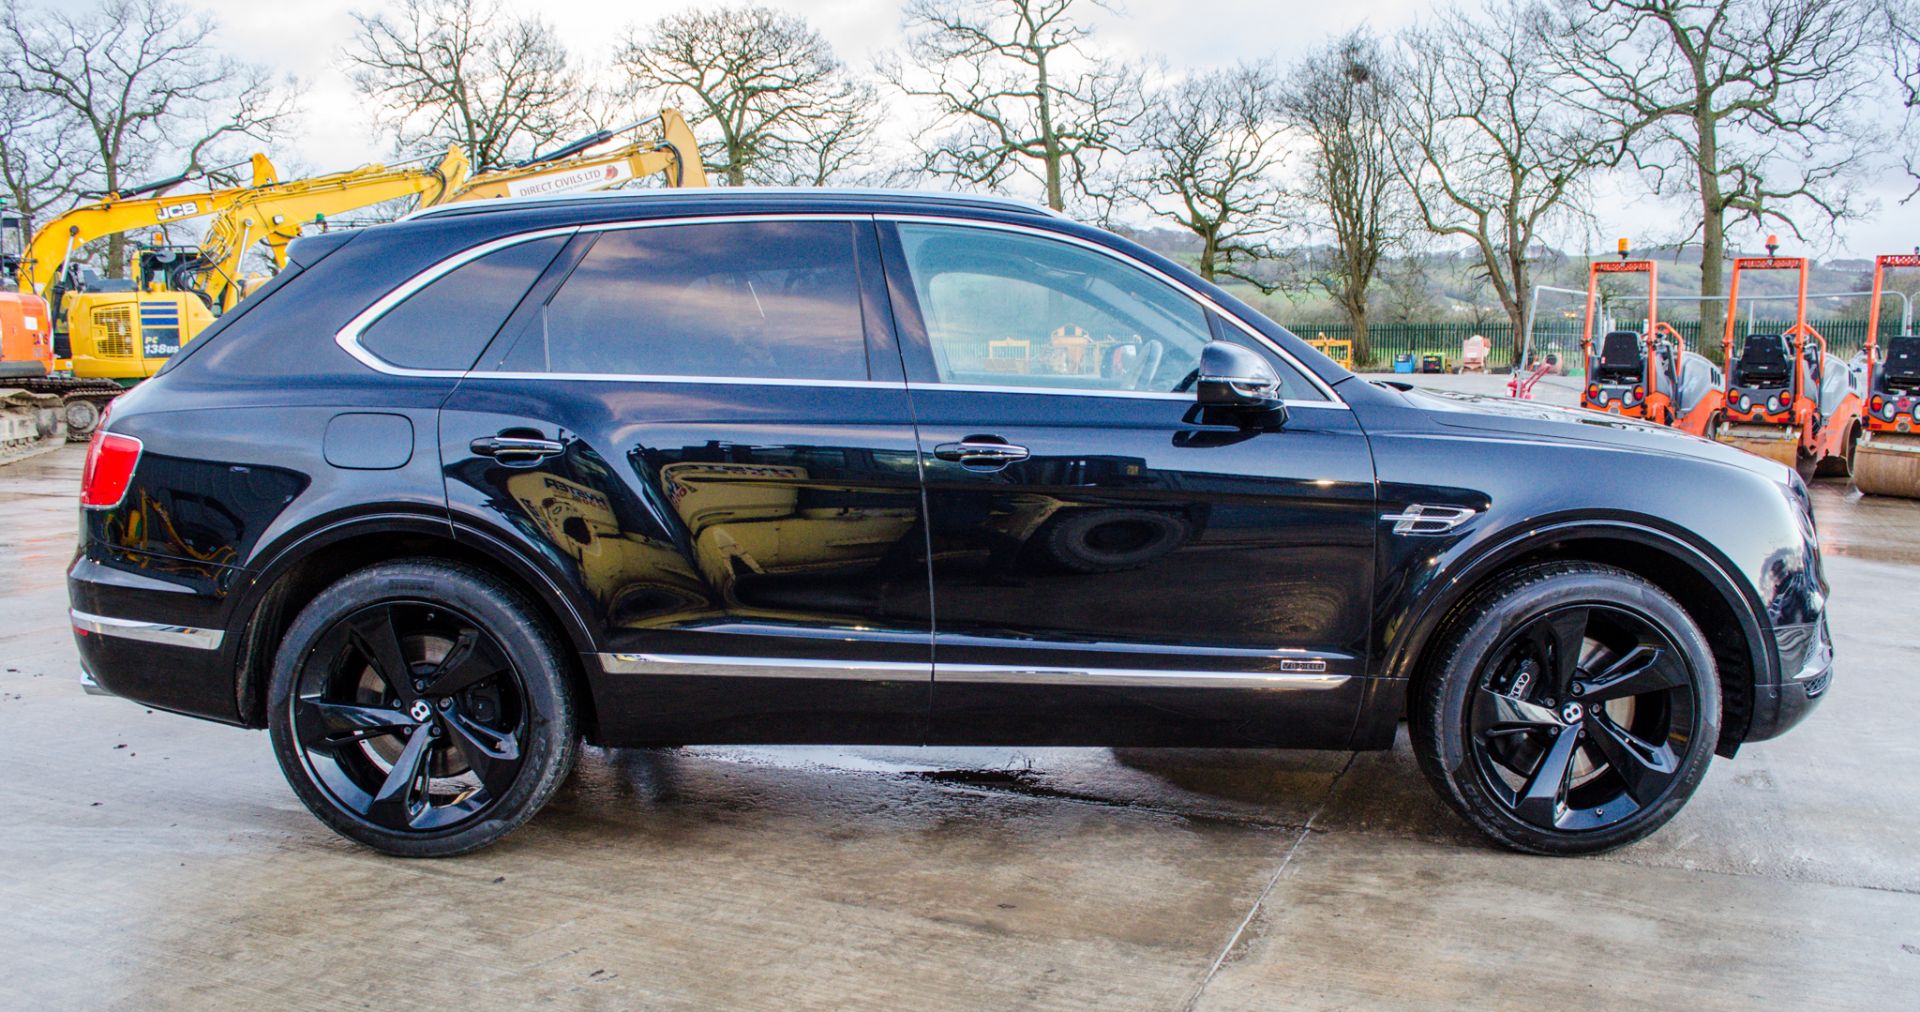 Bentley Bentayga 4.0 V8 diesel 4wd 7 seat SUV Reg No: SG 18 HPU Recorded Mileage: 37,650 Date of - Image 16 of 41